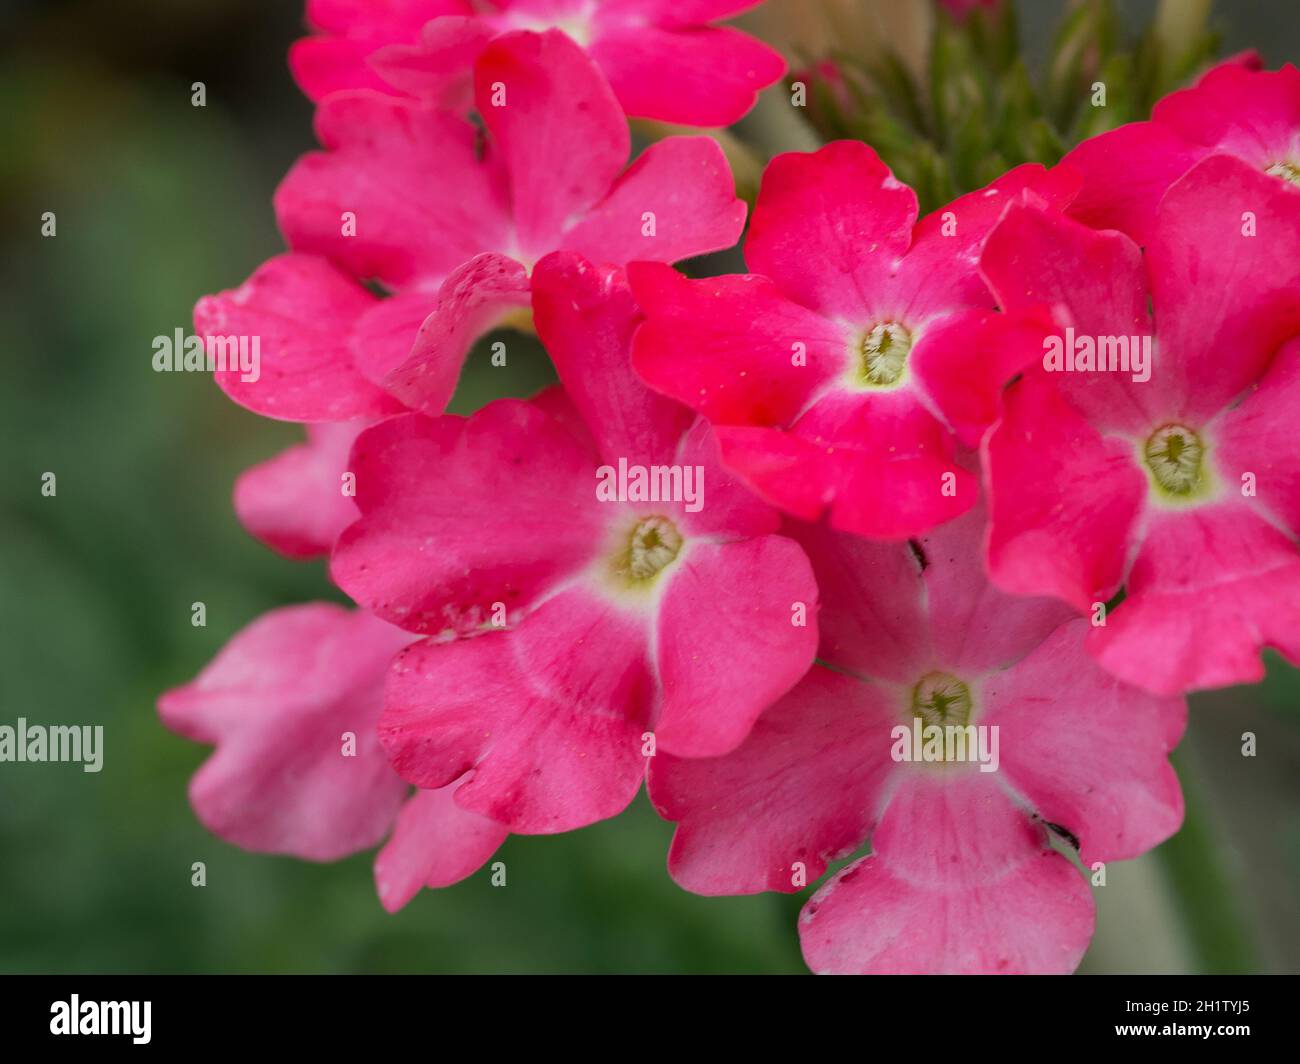 Verbena flowers, close-up shot. An inflorescence of small pink flowers. Stock Photo